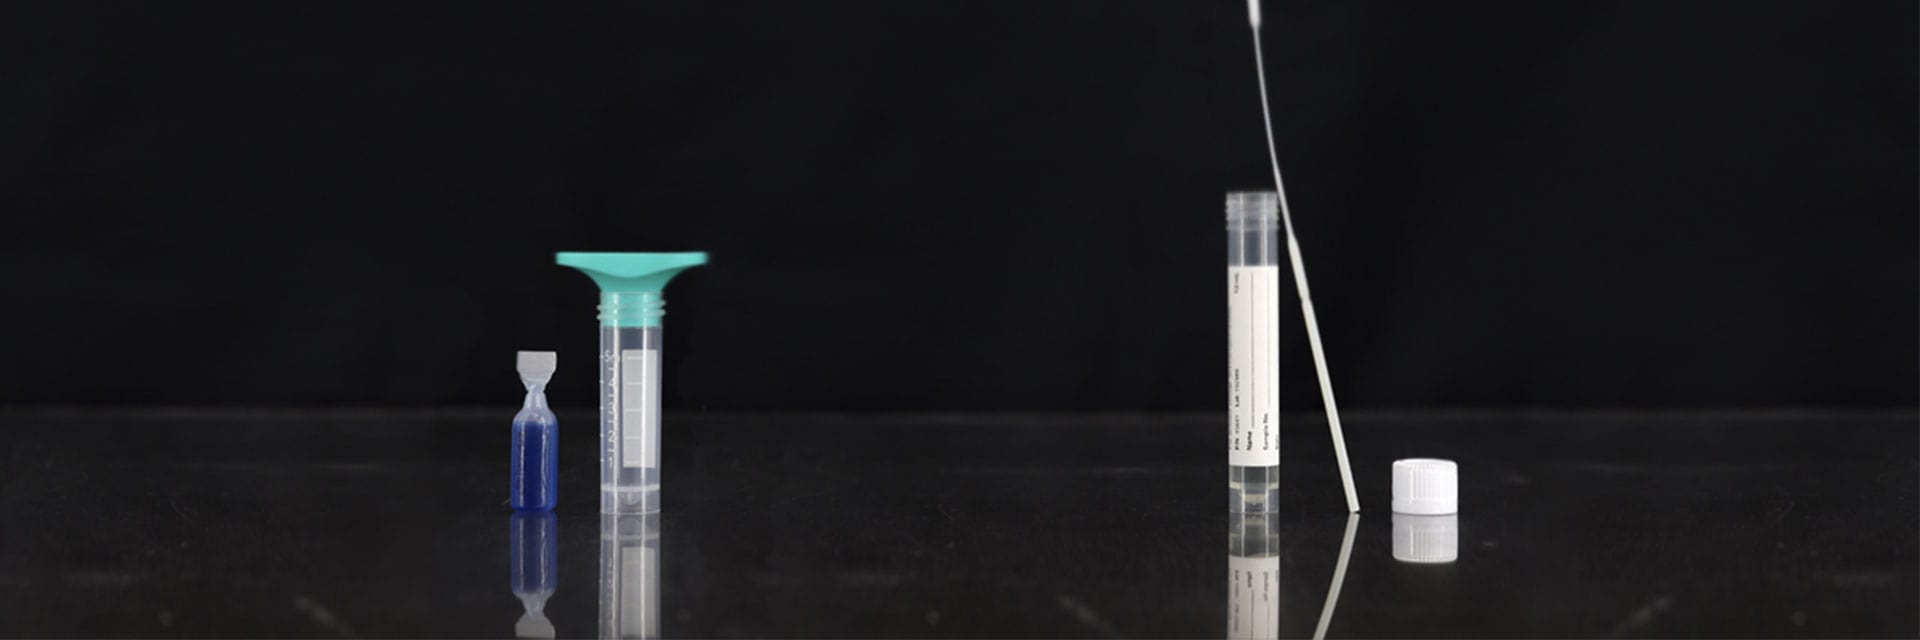 saliva collection and preservation device next to a swab and tube